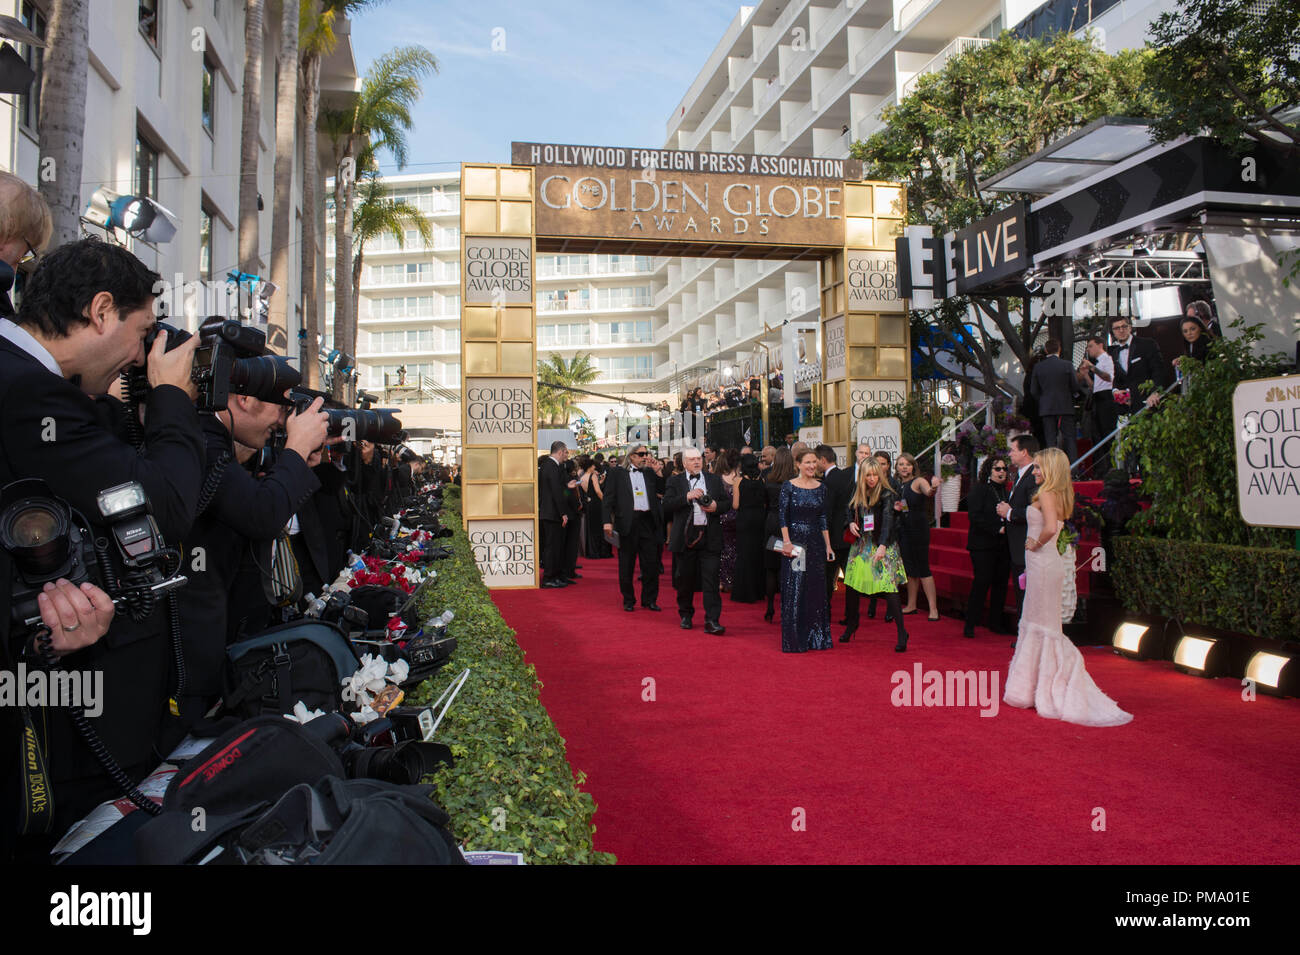 The 70th Annual Golden Globe Awards at the Beverly Hilton in Beverly Hills, CA on Sunday, January 13, 2013. Stock Photo